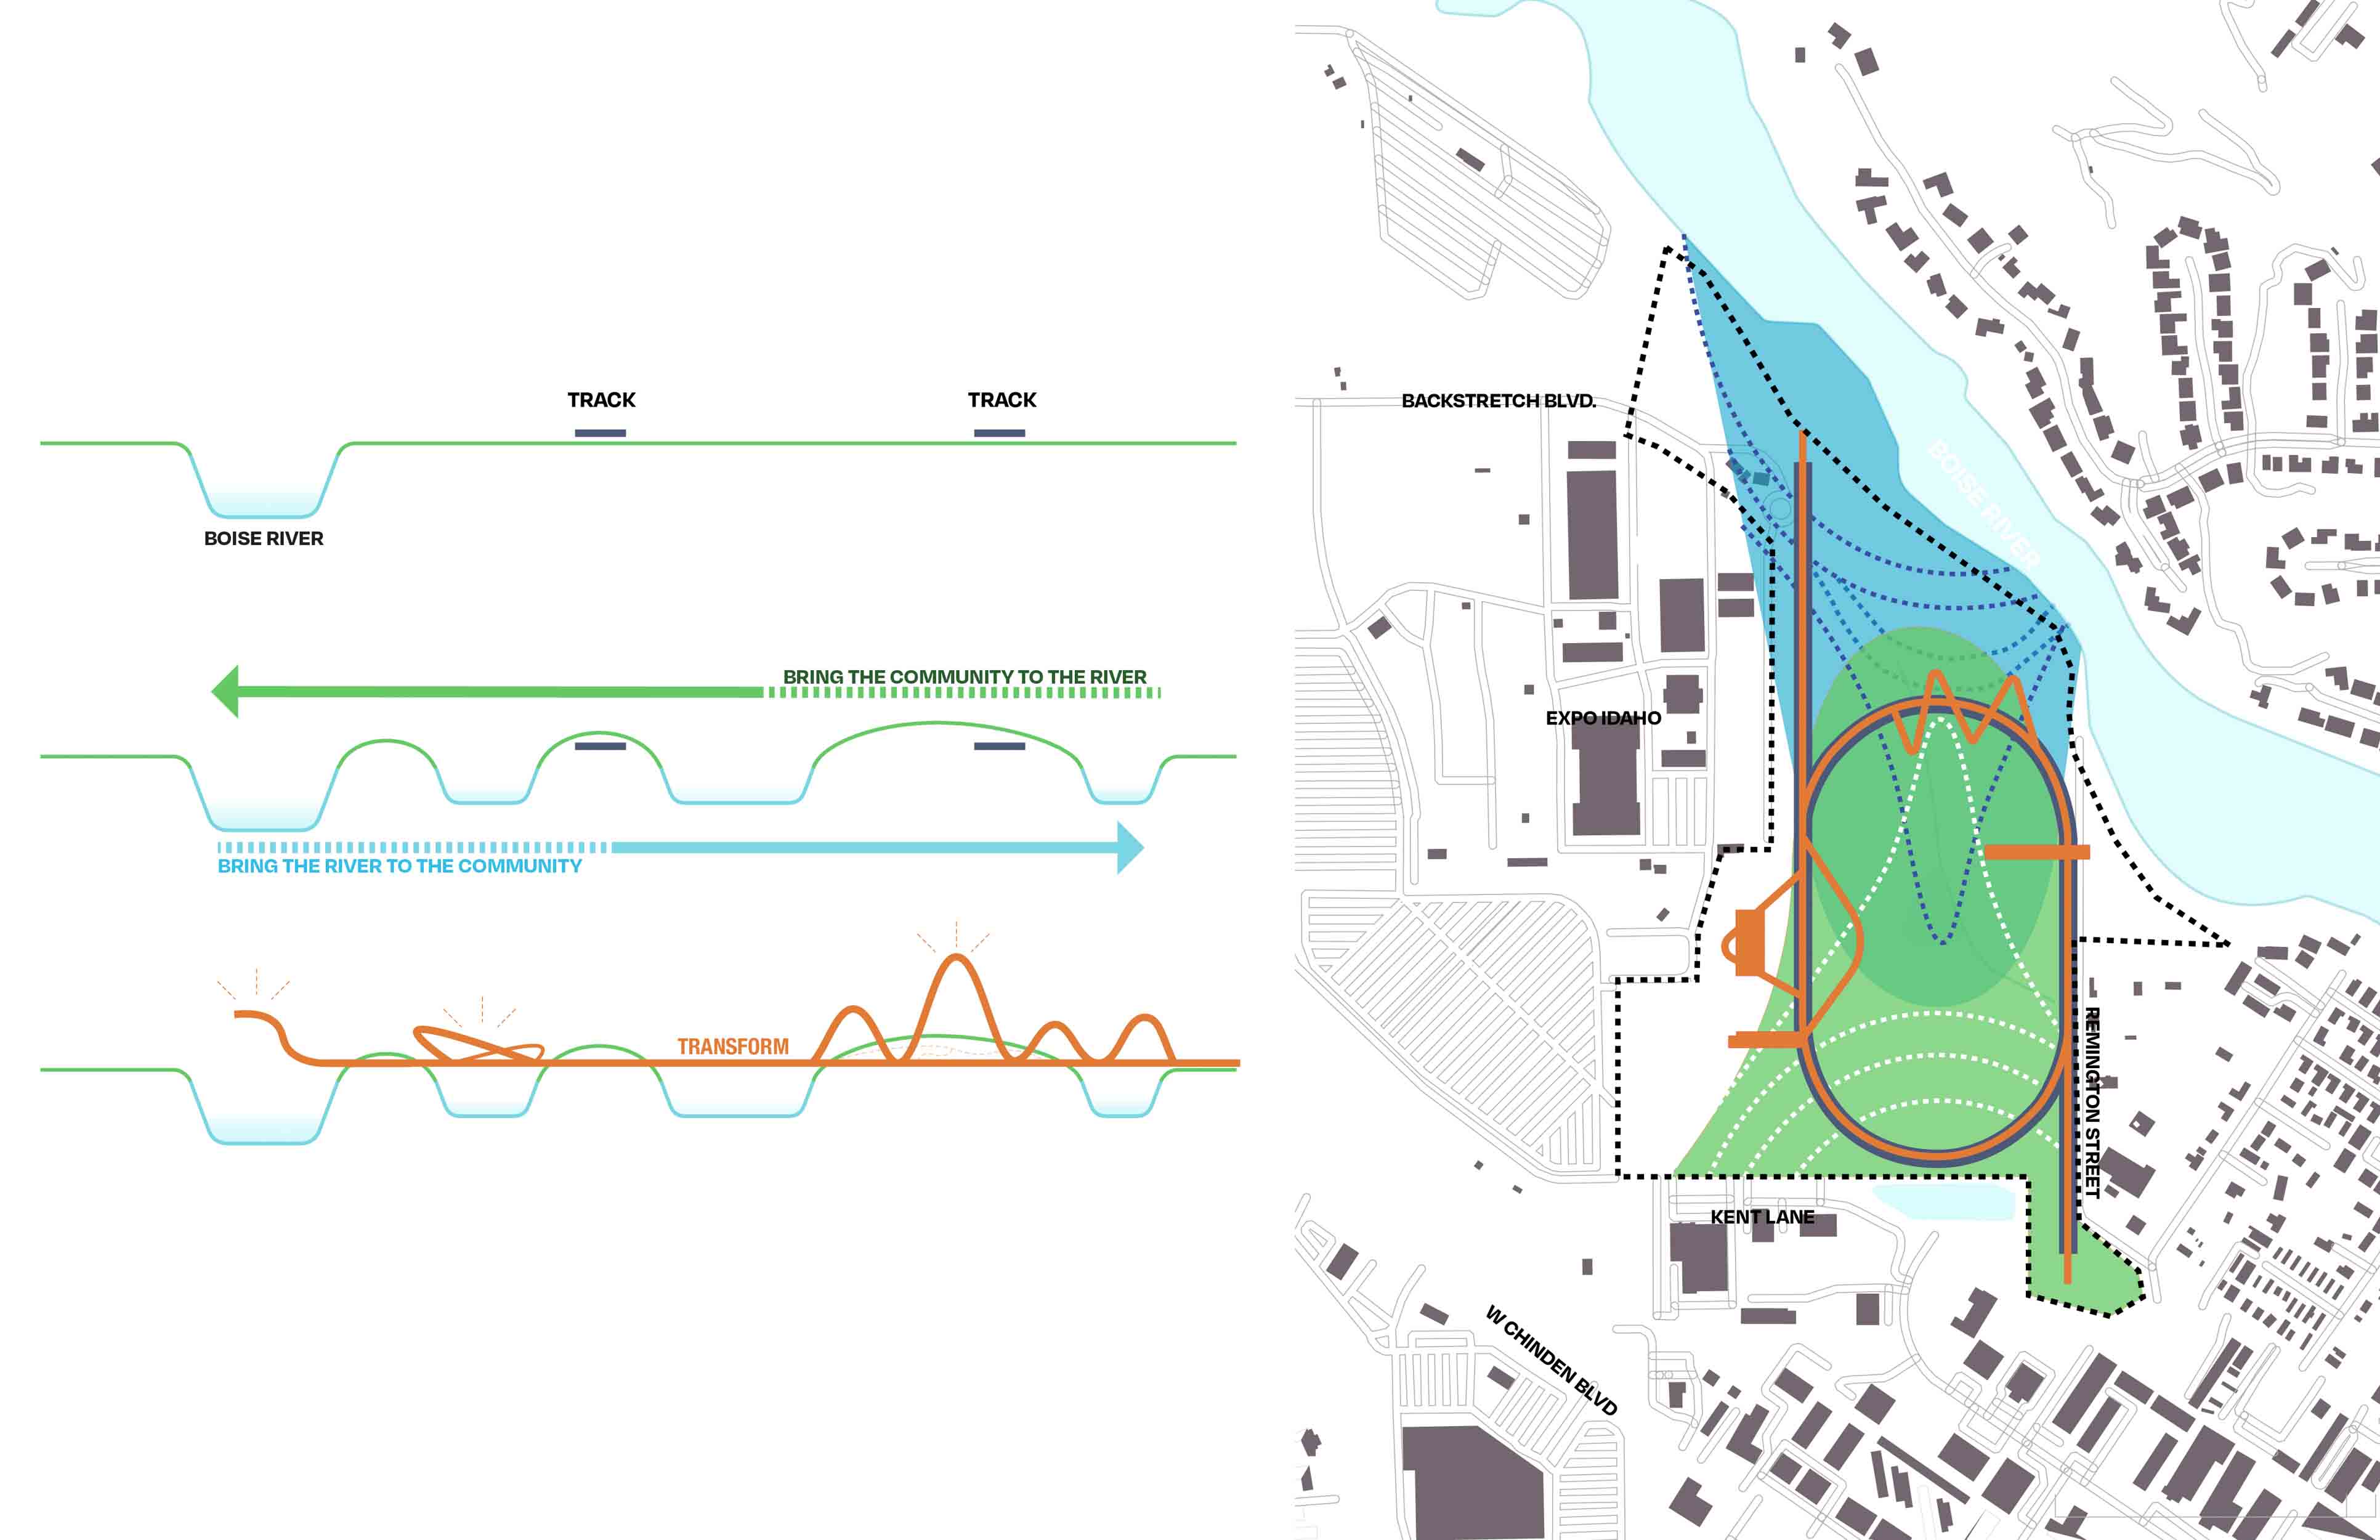 Diagrams representing how the design would bring the community to the river and transform relics for the future